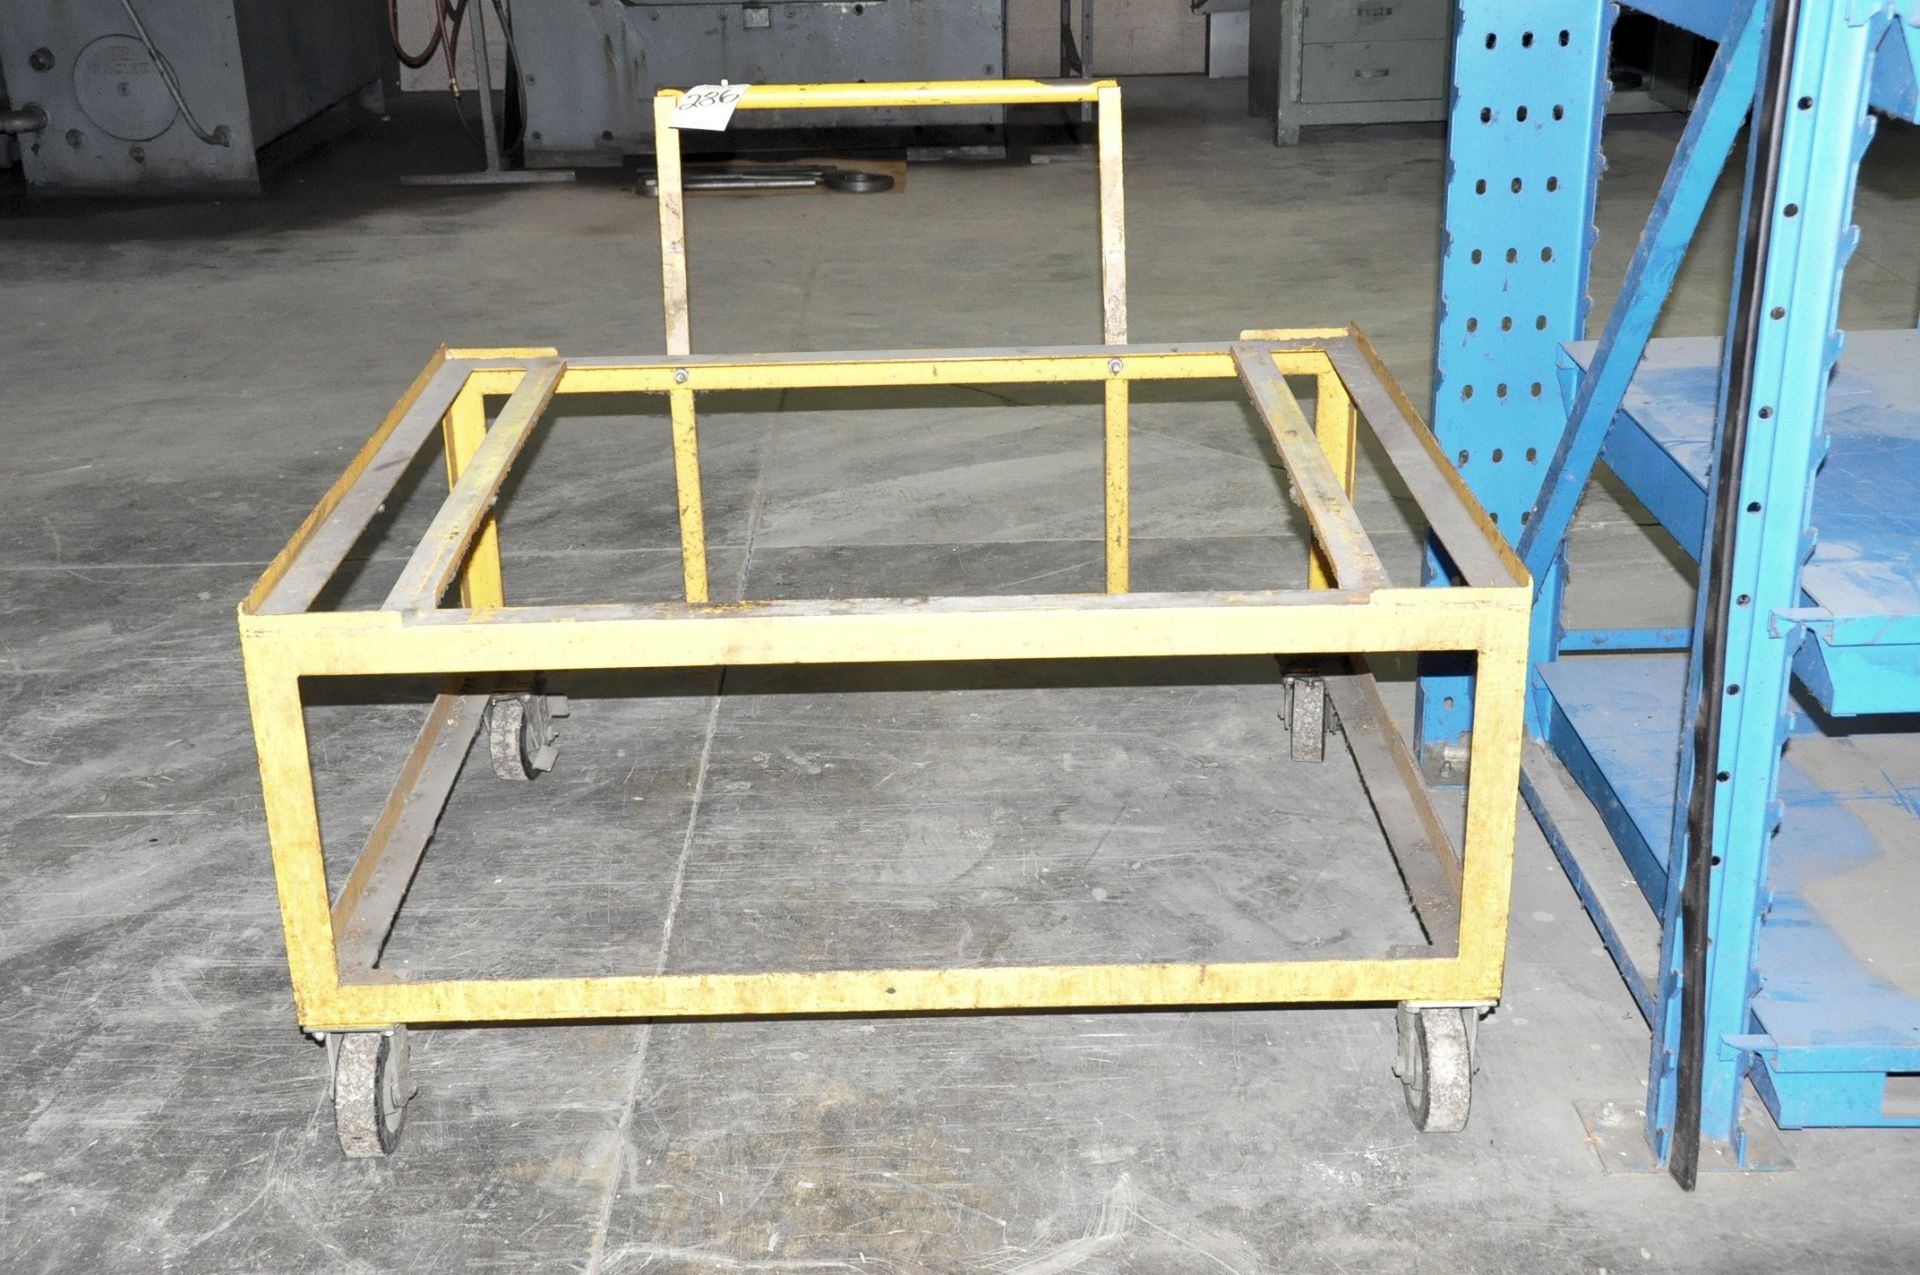 STANLEY STAK SYSTEM MODULAR RACK STACKING SYSTEM, 2,000-Lbs. Capacity Lift, (14) Sections Adjustable - Image 3 of 4